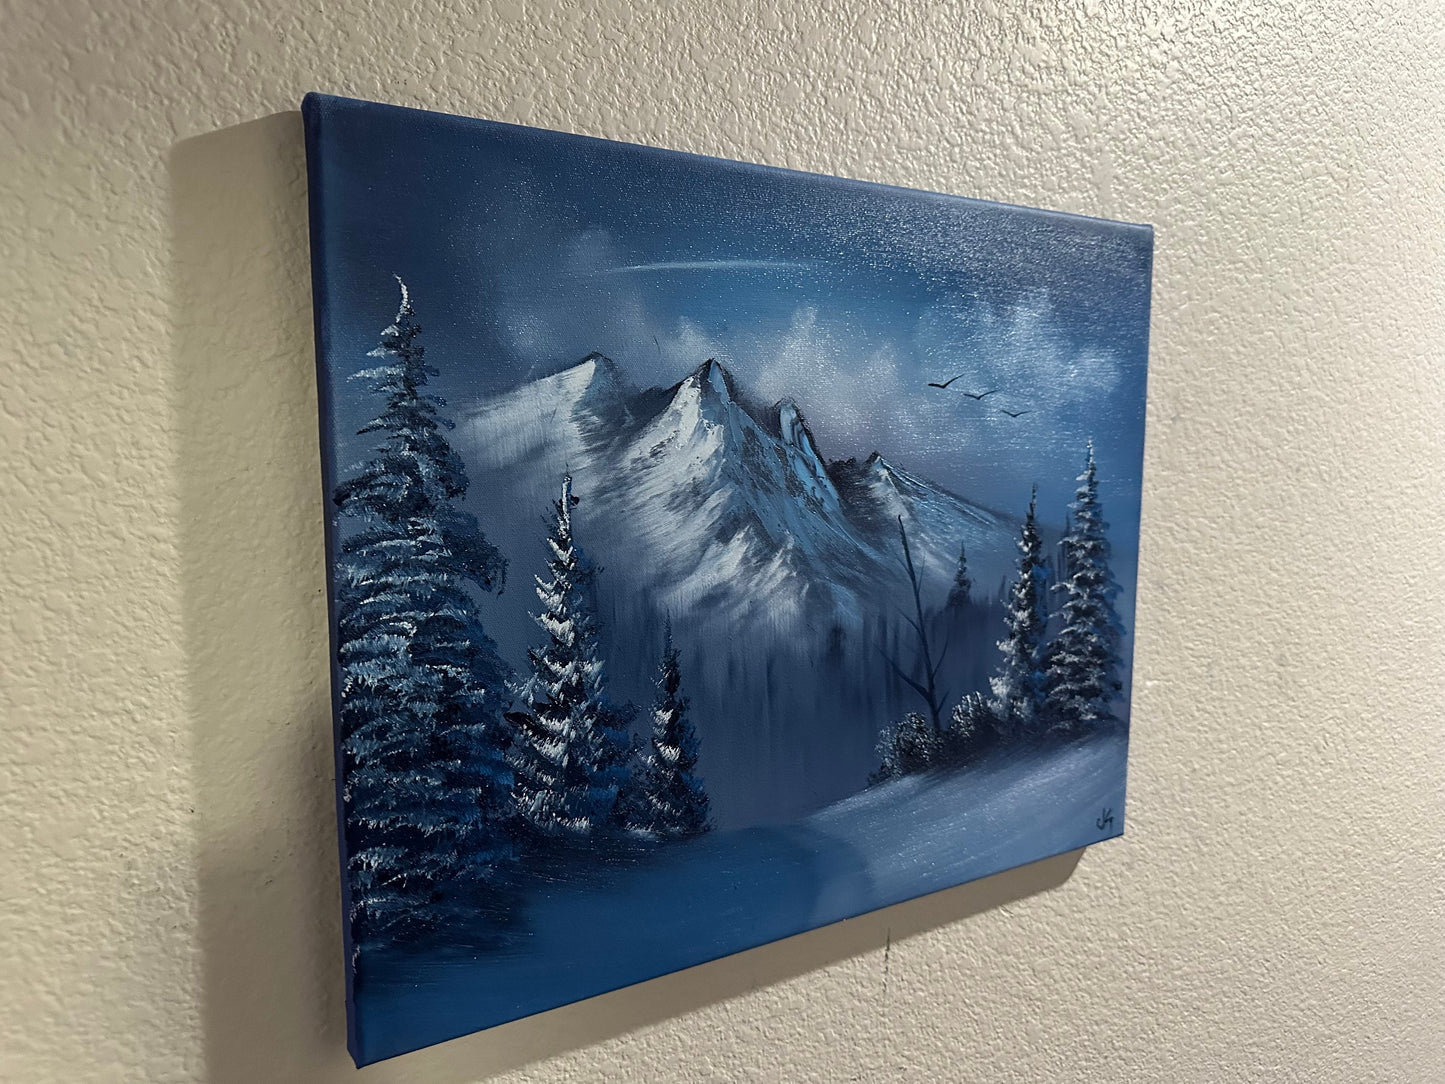 Painting 993 & 1/2 - 16x20" Canvas - Winter Landscape painted Live on TikTok on 10/27/23 by PaintWithJosh